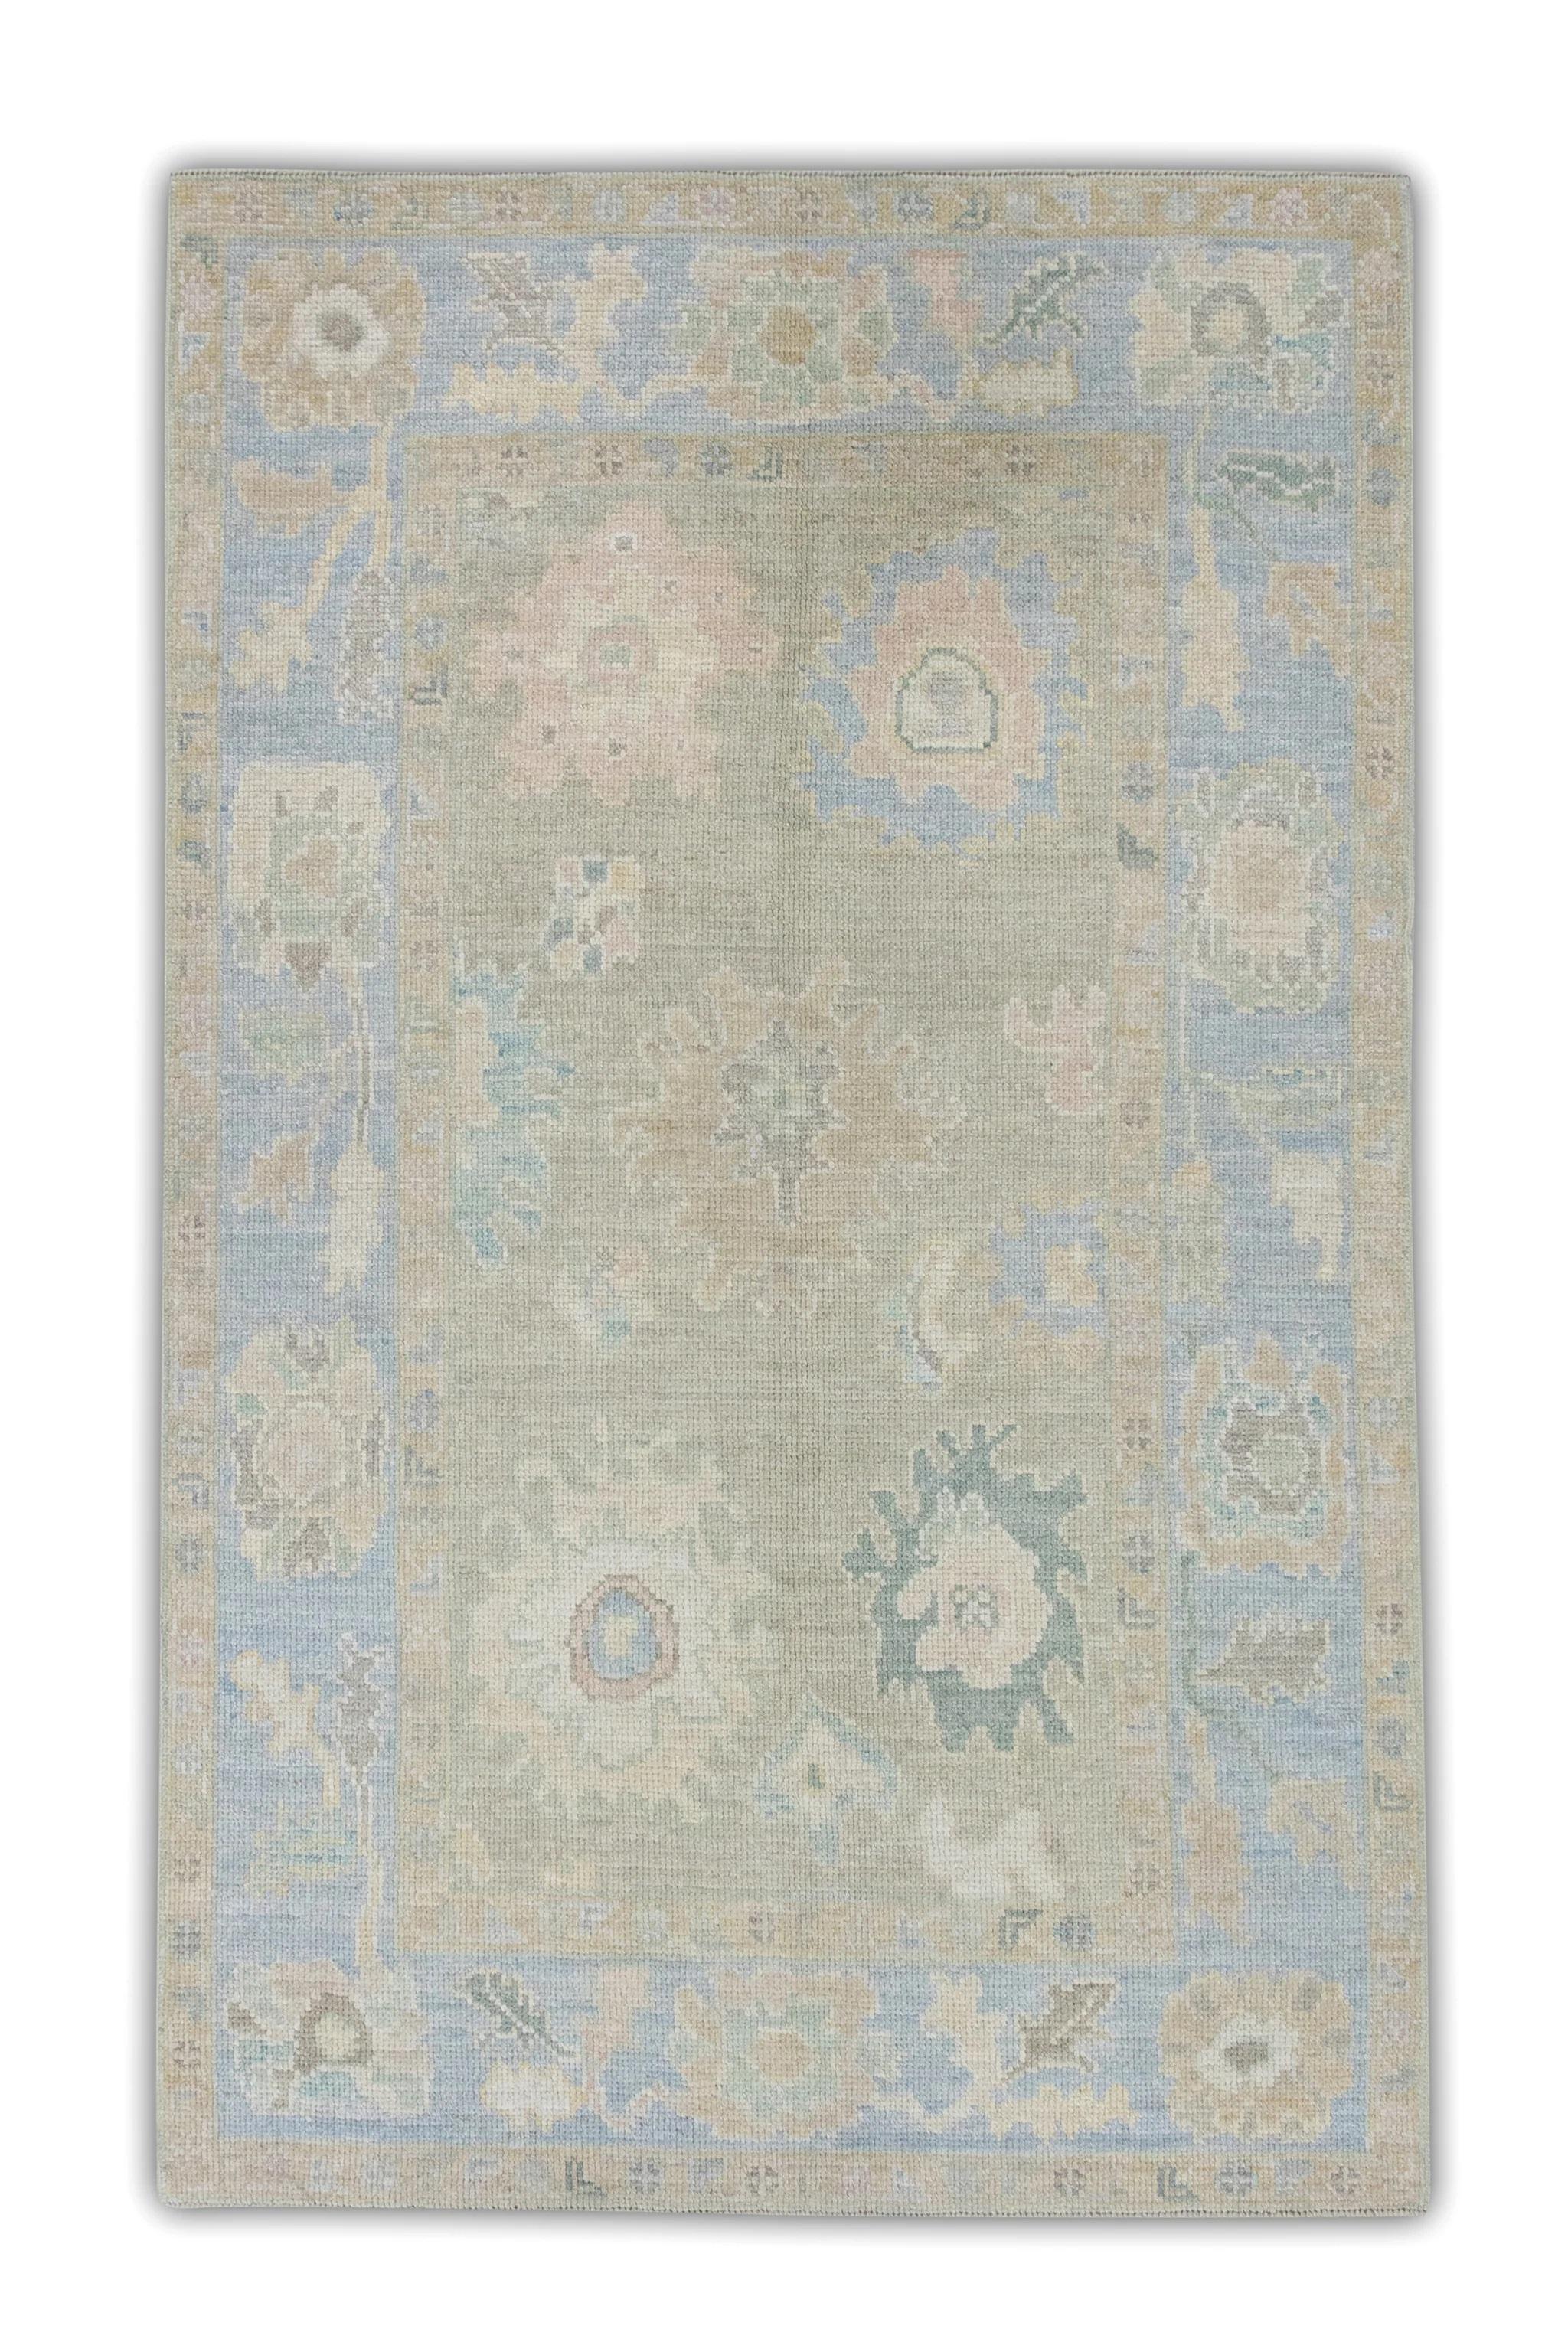 Brown and Blue Floral Handwoven Wool Turkish Oushak Rug 4'2